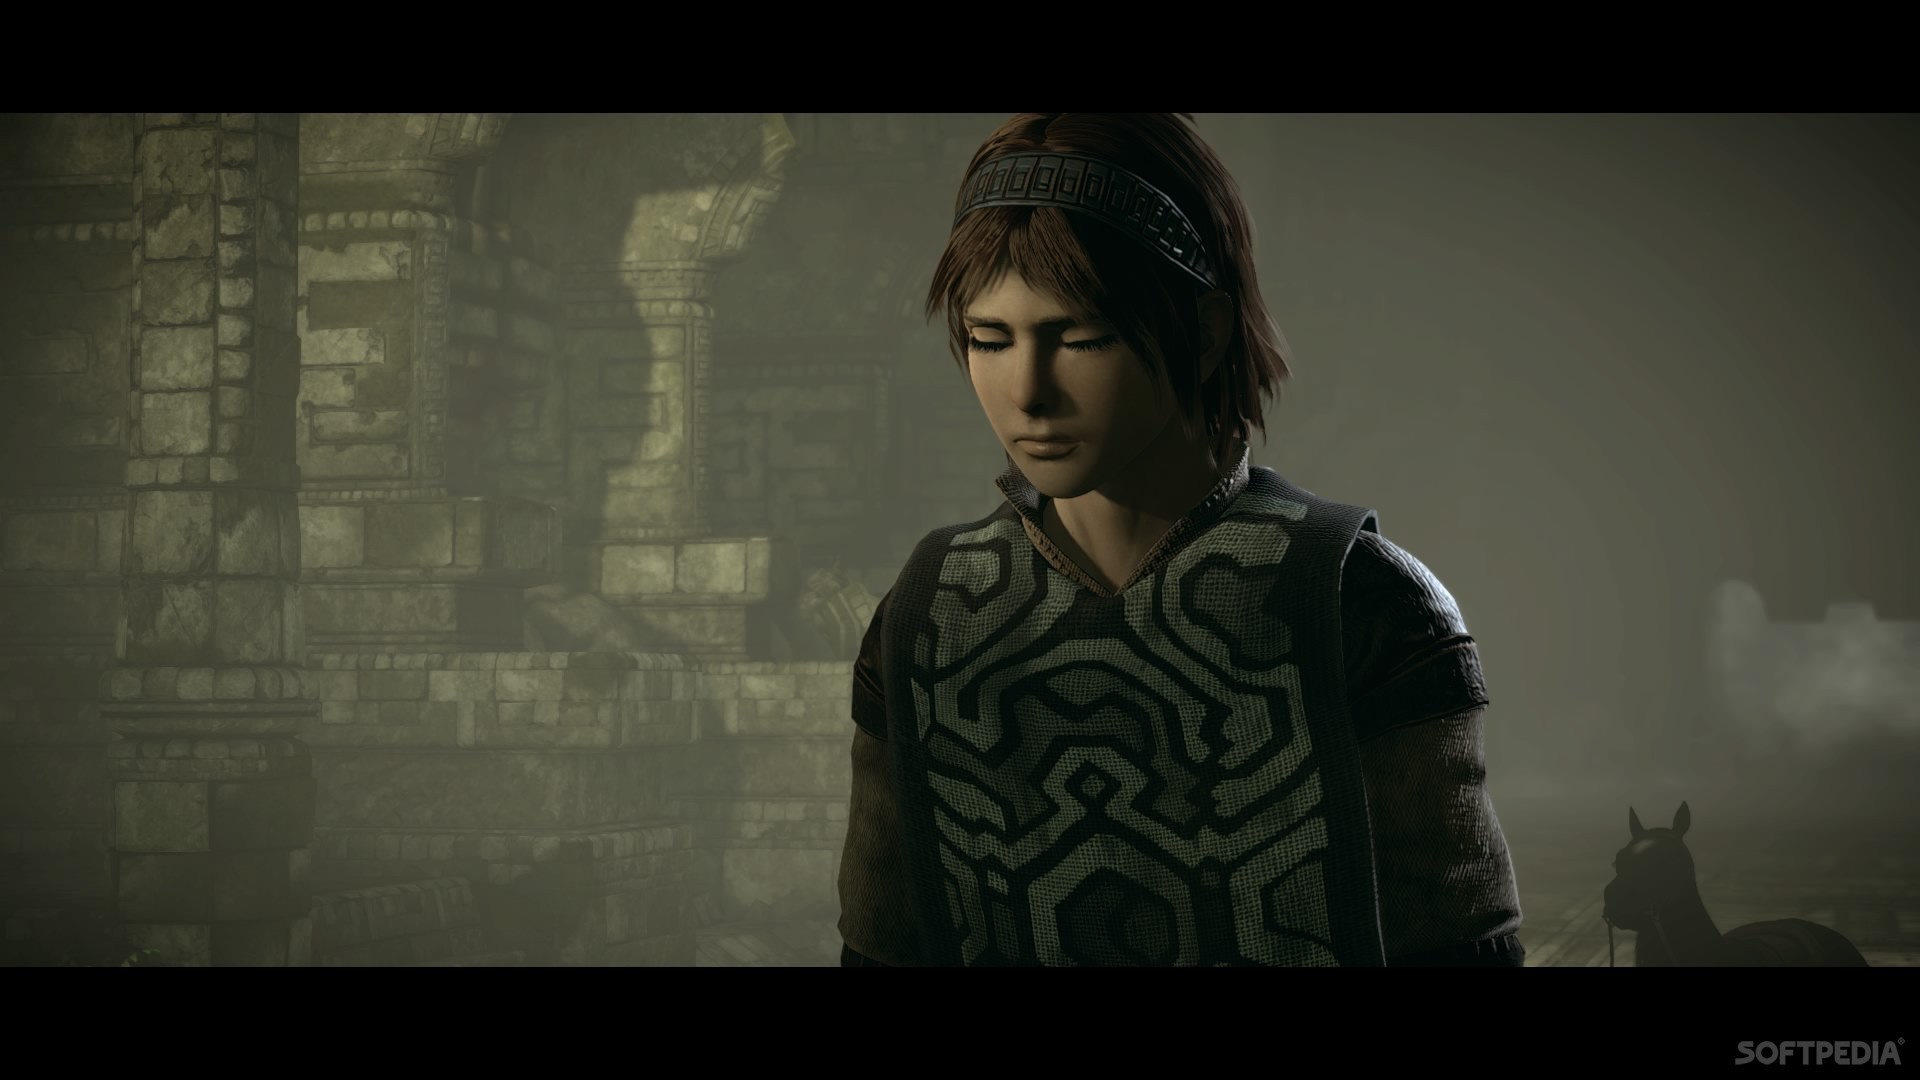 The New 'Shadow of the Colossus' Is So Good It Erases the Original